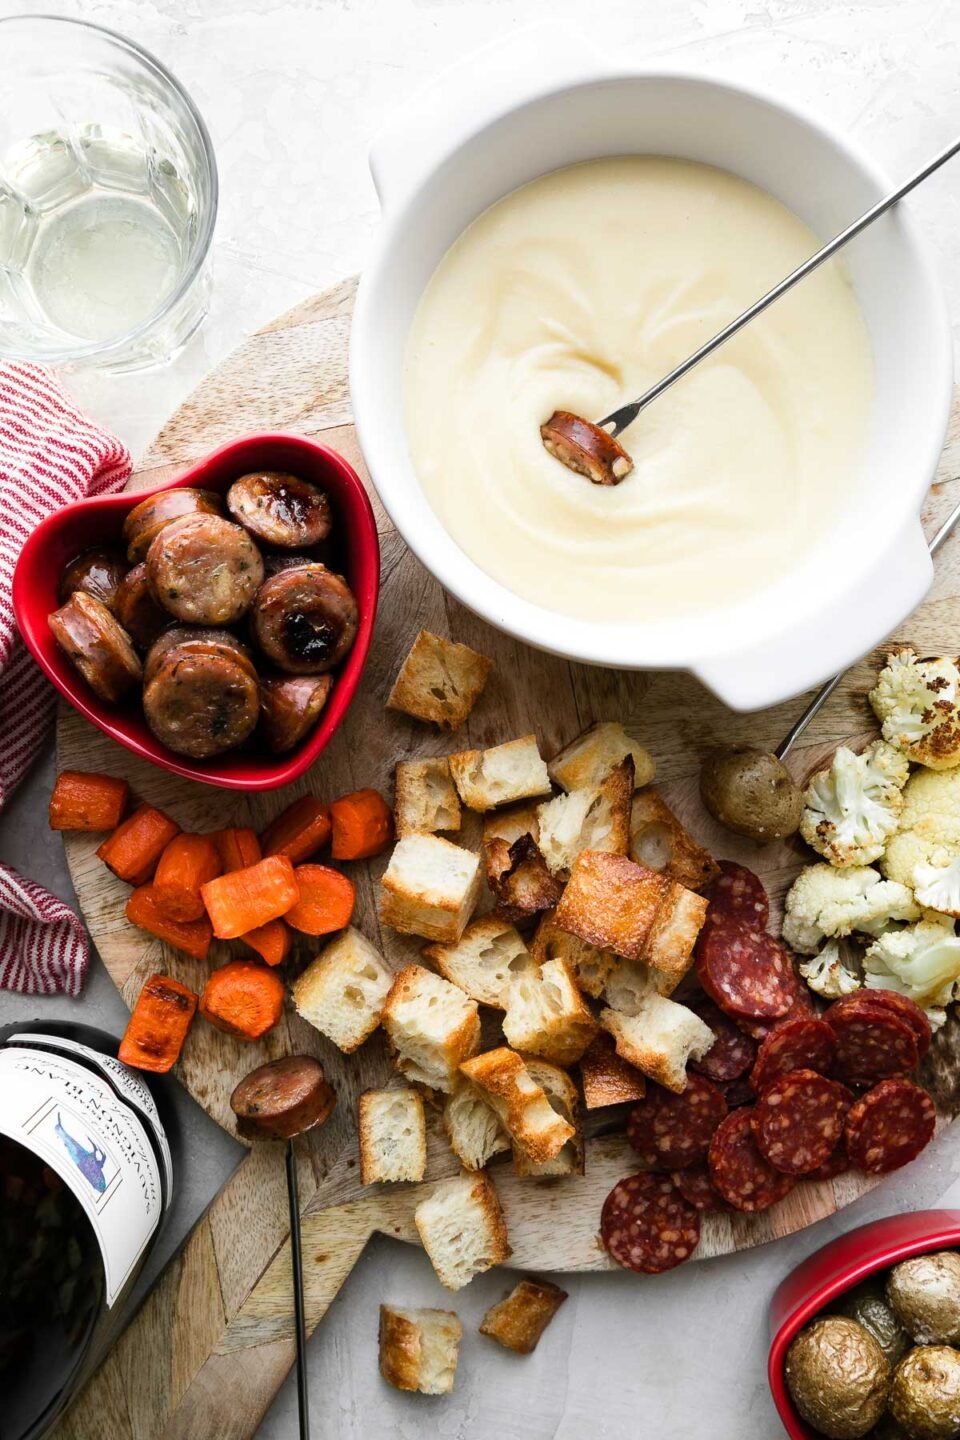 An overhead shot of a cheese fondue for two spread is set up on a wooden cheese board. Cheese fondue fills a white fondue pot or caquelon which rests atop the cheese board with bite-sized pieces of roasted carrots, bread, cauliflower, potatoes, chicken sausage, and mini salami for dipping surrounding. One fondue fork holding a piece of chicken sausage is dipped into the fondue while another rests atop the cheese board which sits atop a creamy white textured surface. A bottle of Exquisite Collection Sauvignon Blanc, a red and white striped linen napkin, a glass of white wine, and a red heart shaped bowl filled with roasted baby potatoes rest alongside the cheese board.